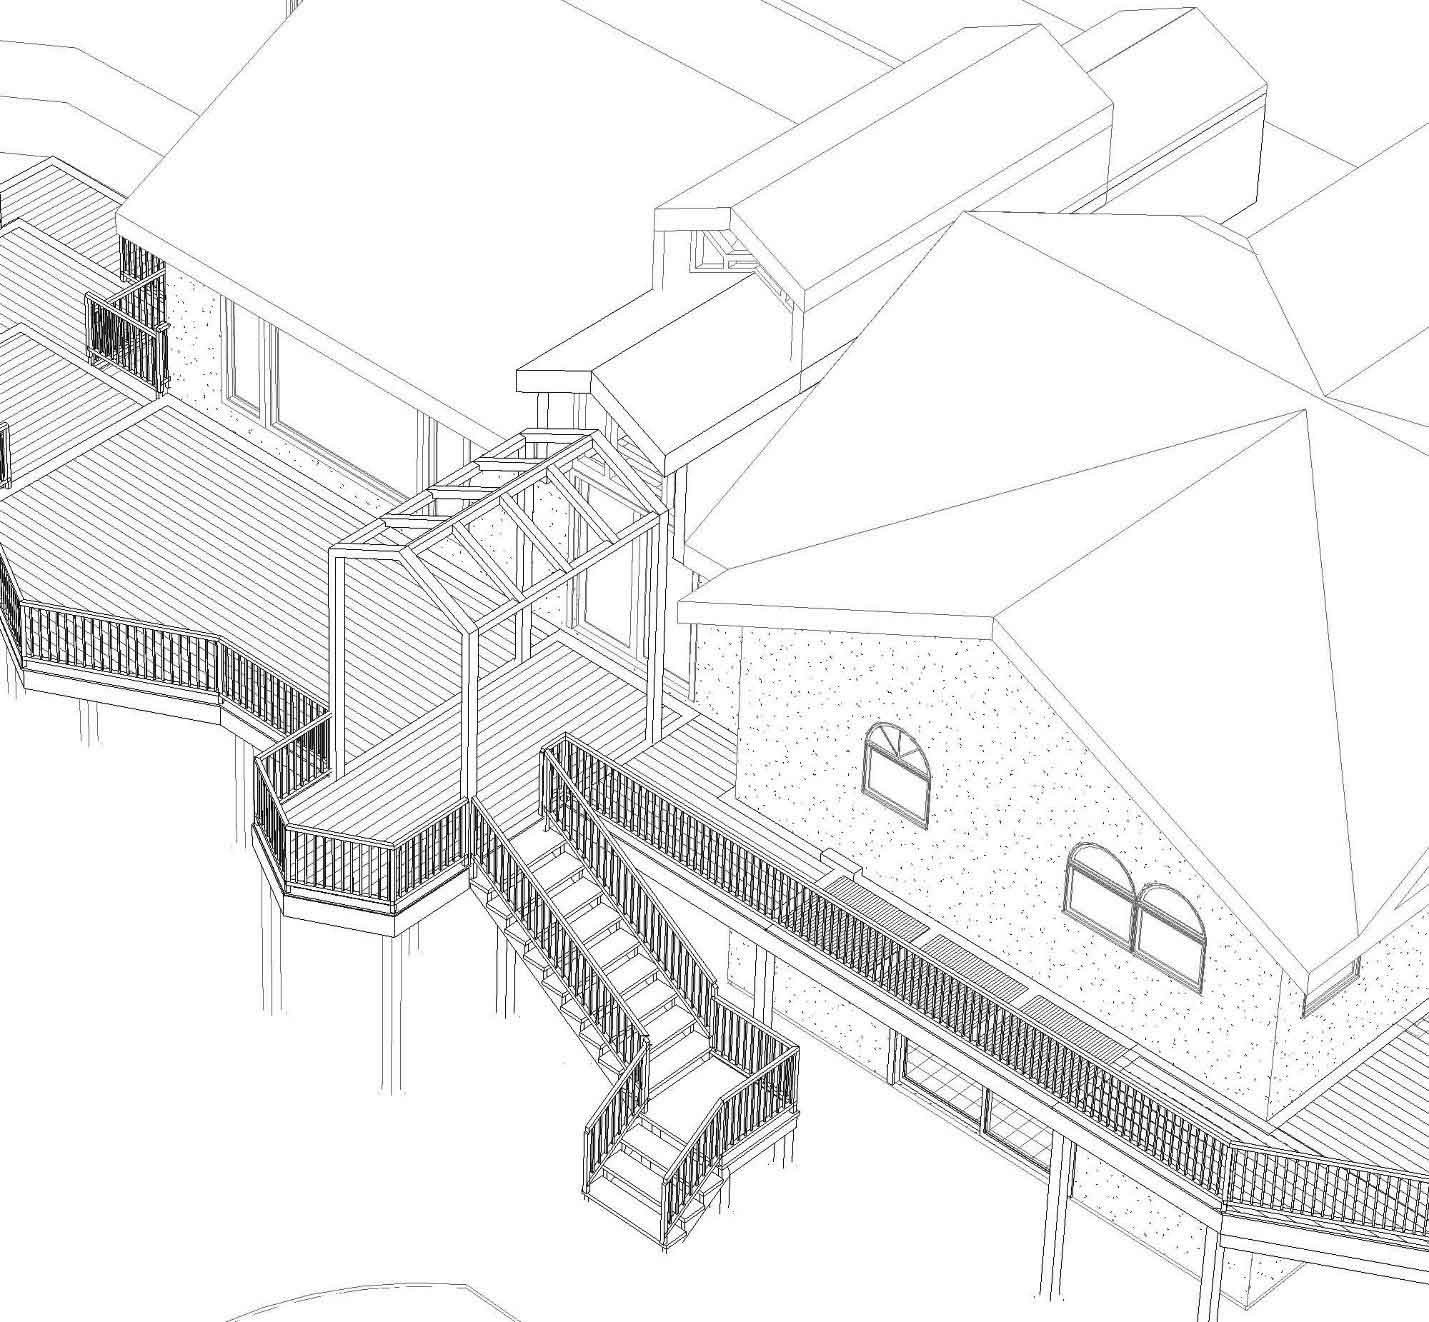 design plan for new deck with bevels, stairs and metal arbor for rural Iowa home whose backyard oasis is being redesigned by Silent Rivers Design+Build of Des Moines